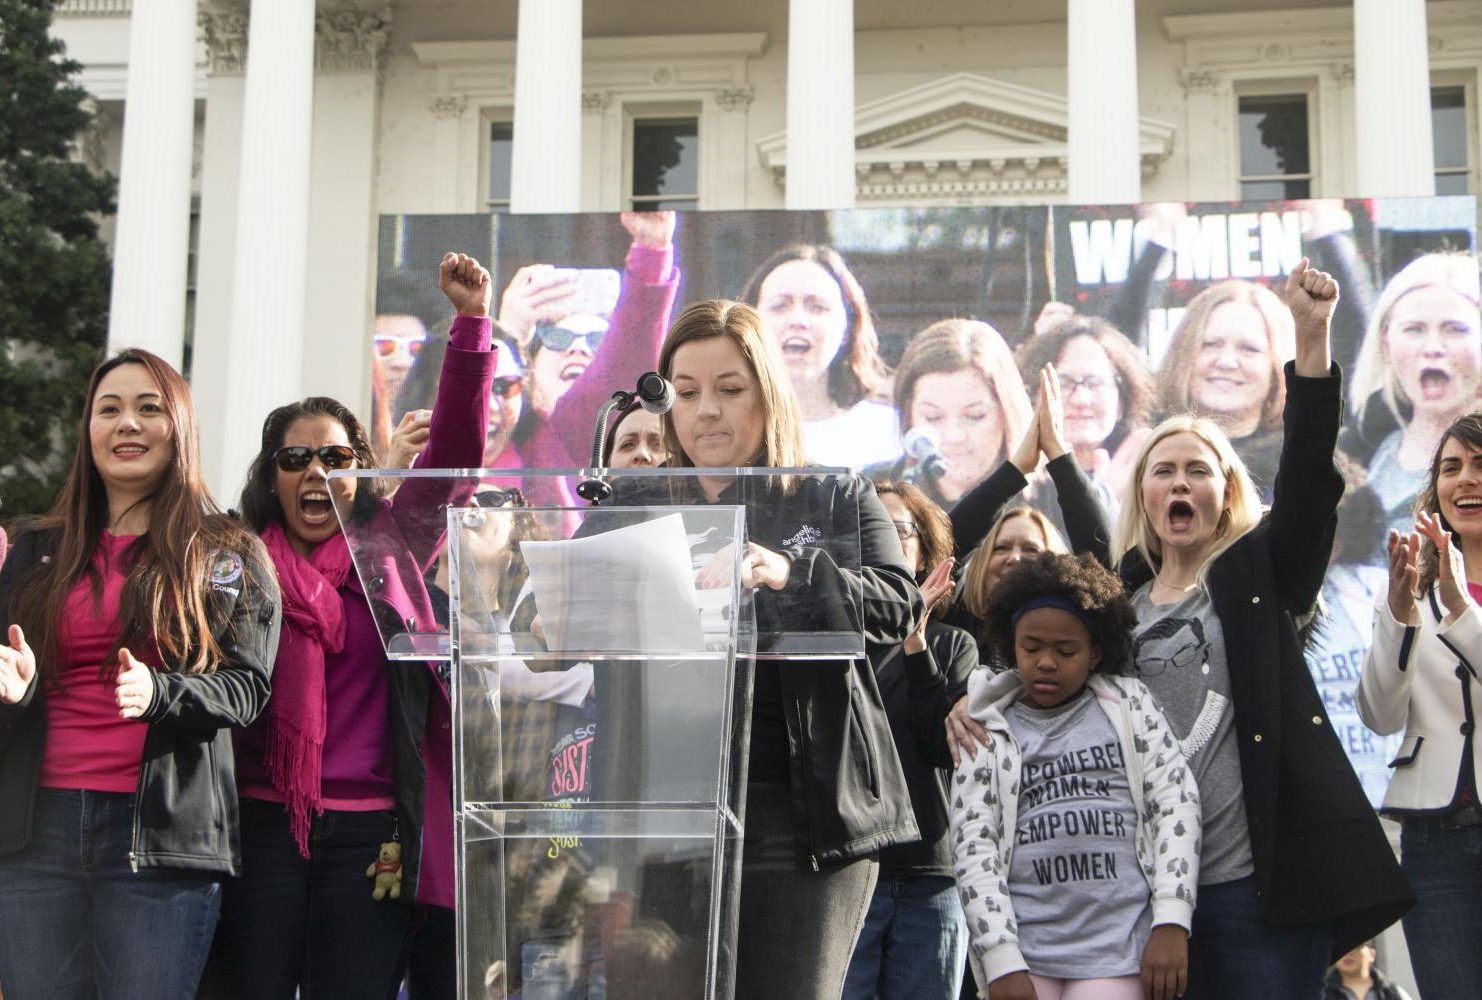 Sacramento councilwoman Angelique Ashby reads off the names of women who were recently elected to boards and councils in the Sacramento area while some of whom joined her on stage at the steps of the California State Capitol during the third annual Sacramento Women’s March on Jan. 19, 2019.